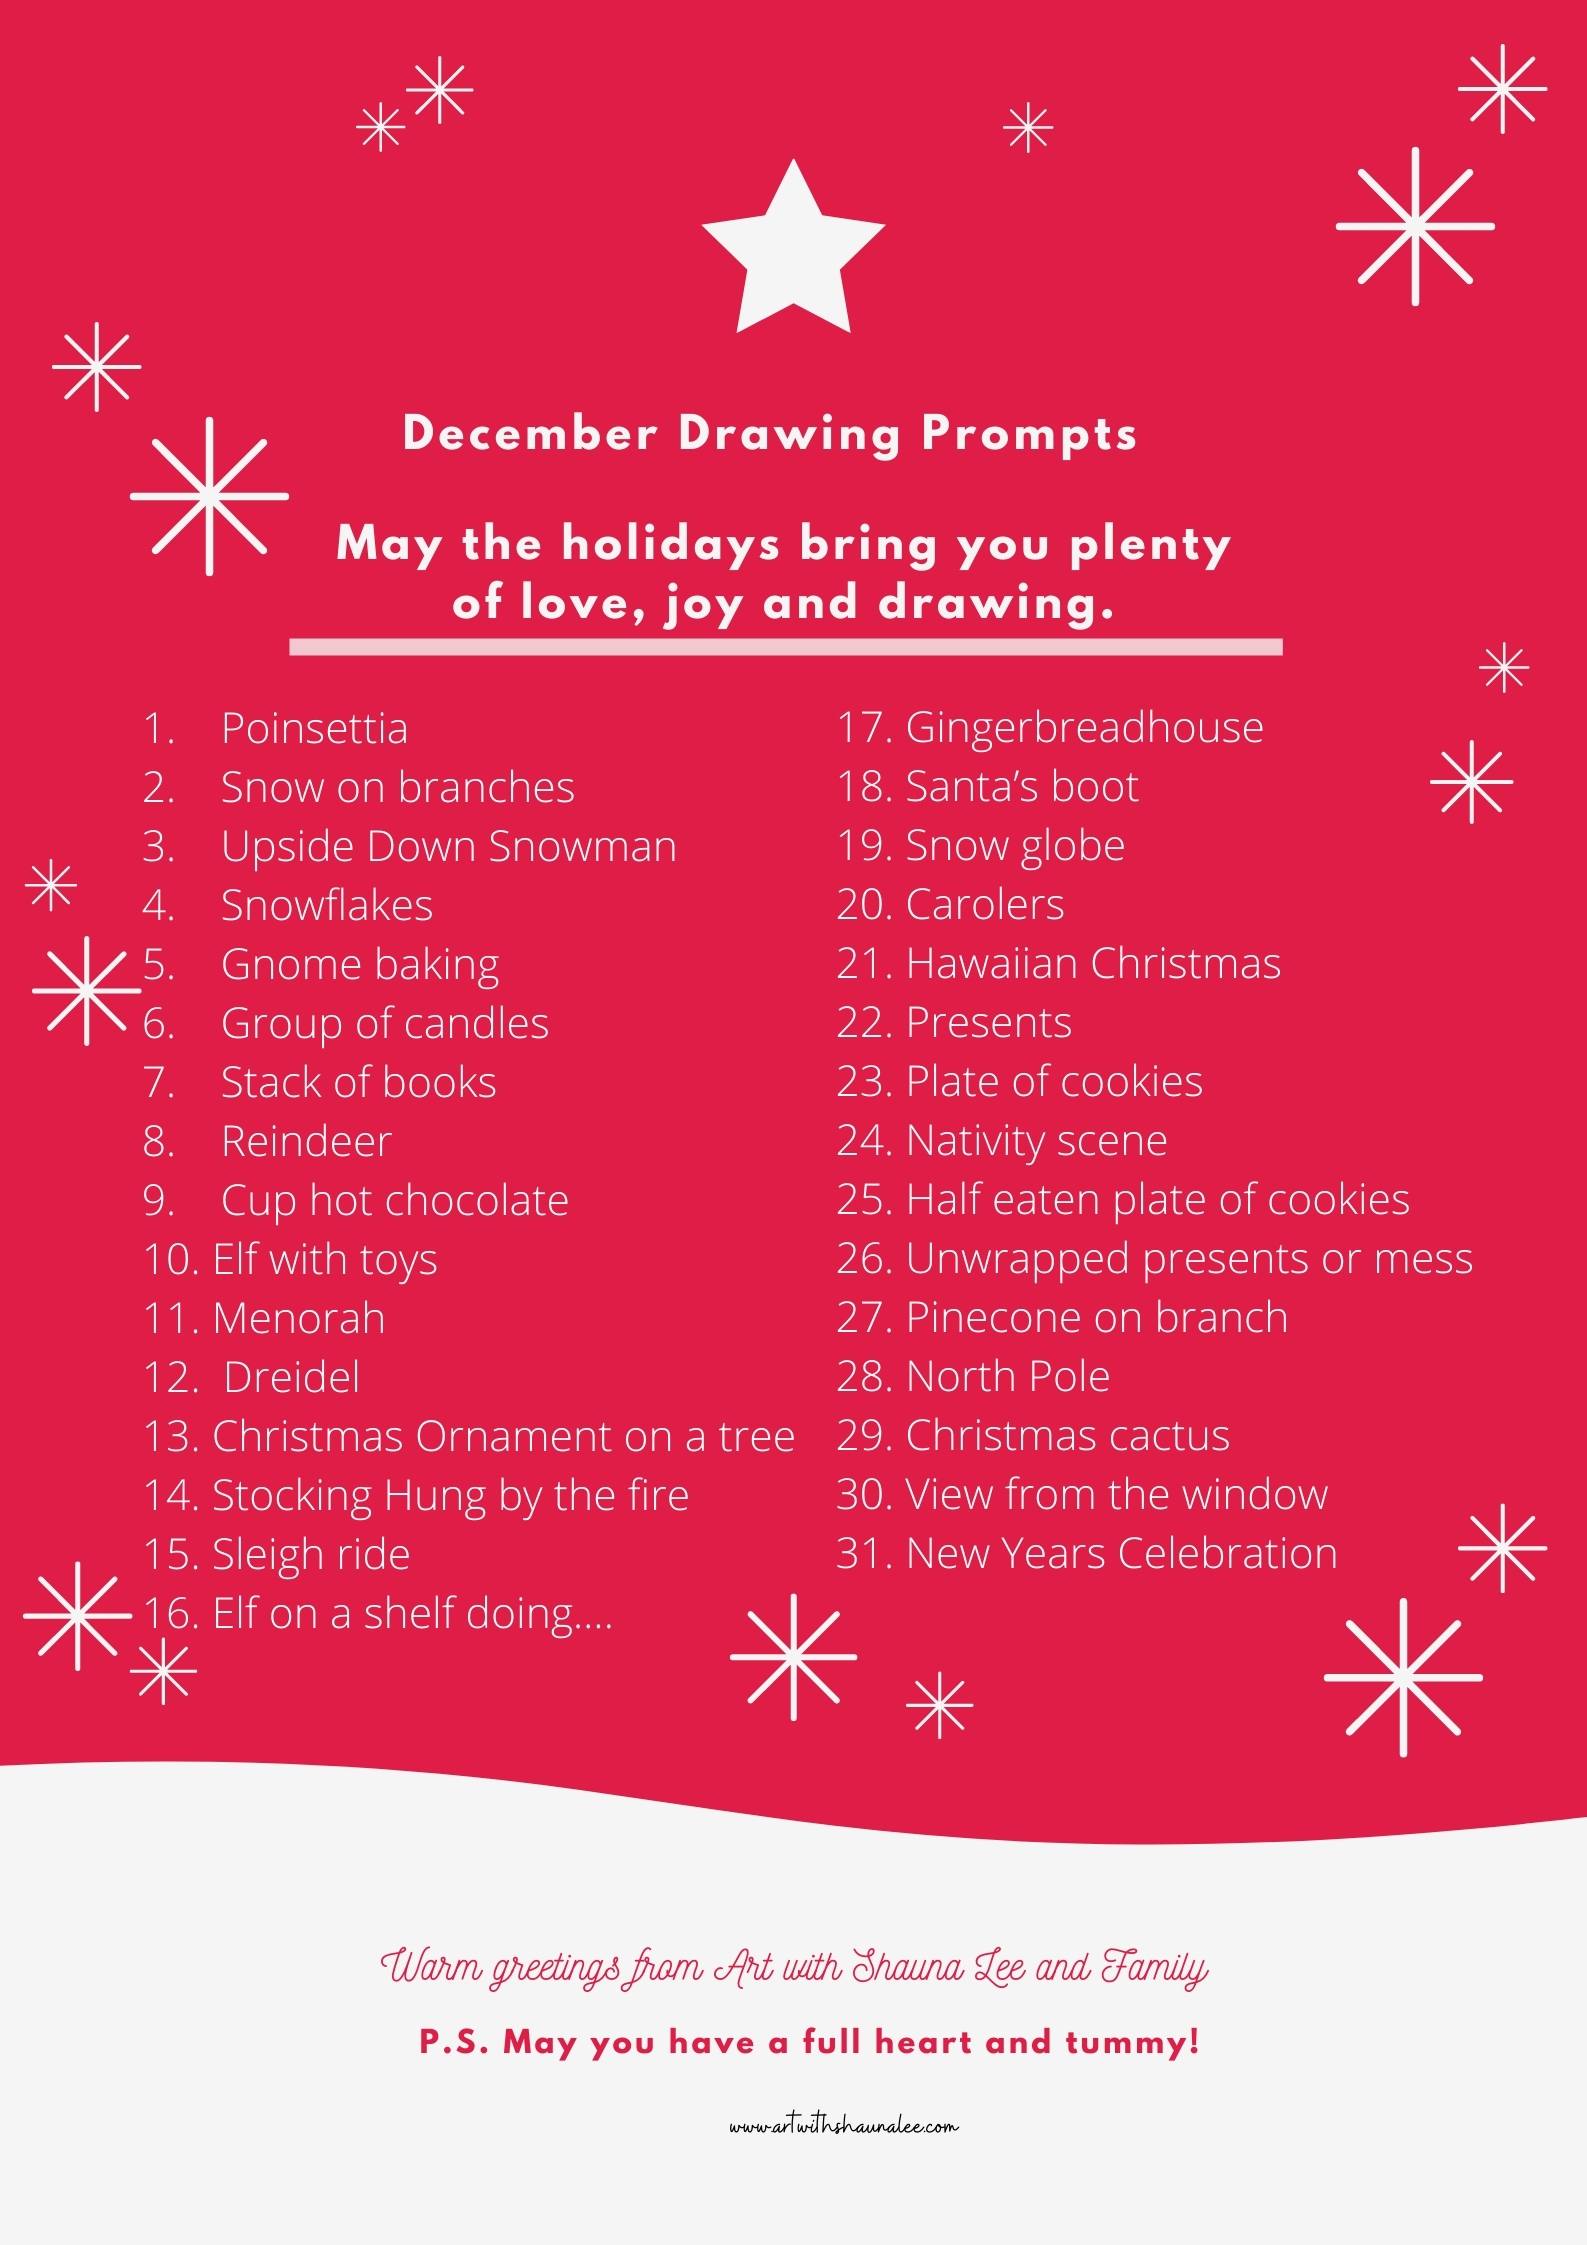 December Drawing Prompts | Art with Shauna Lee